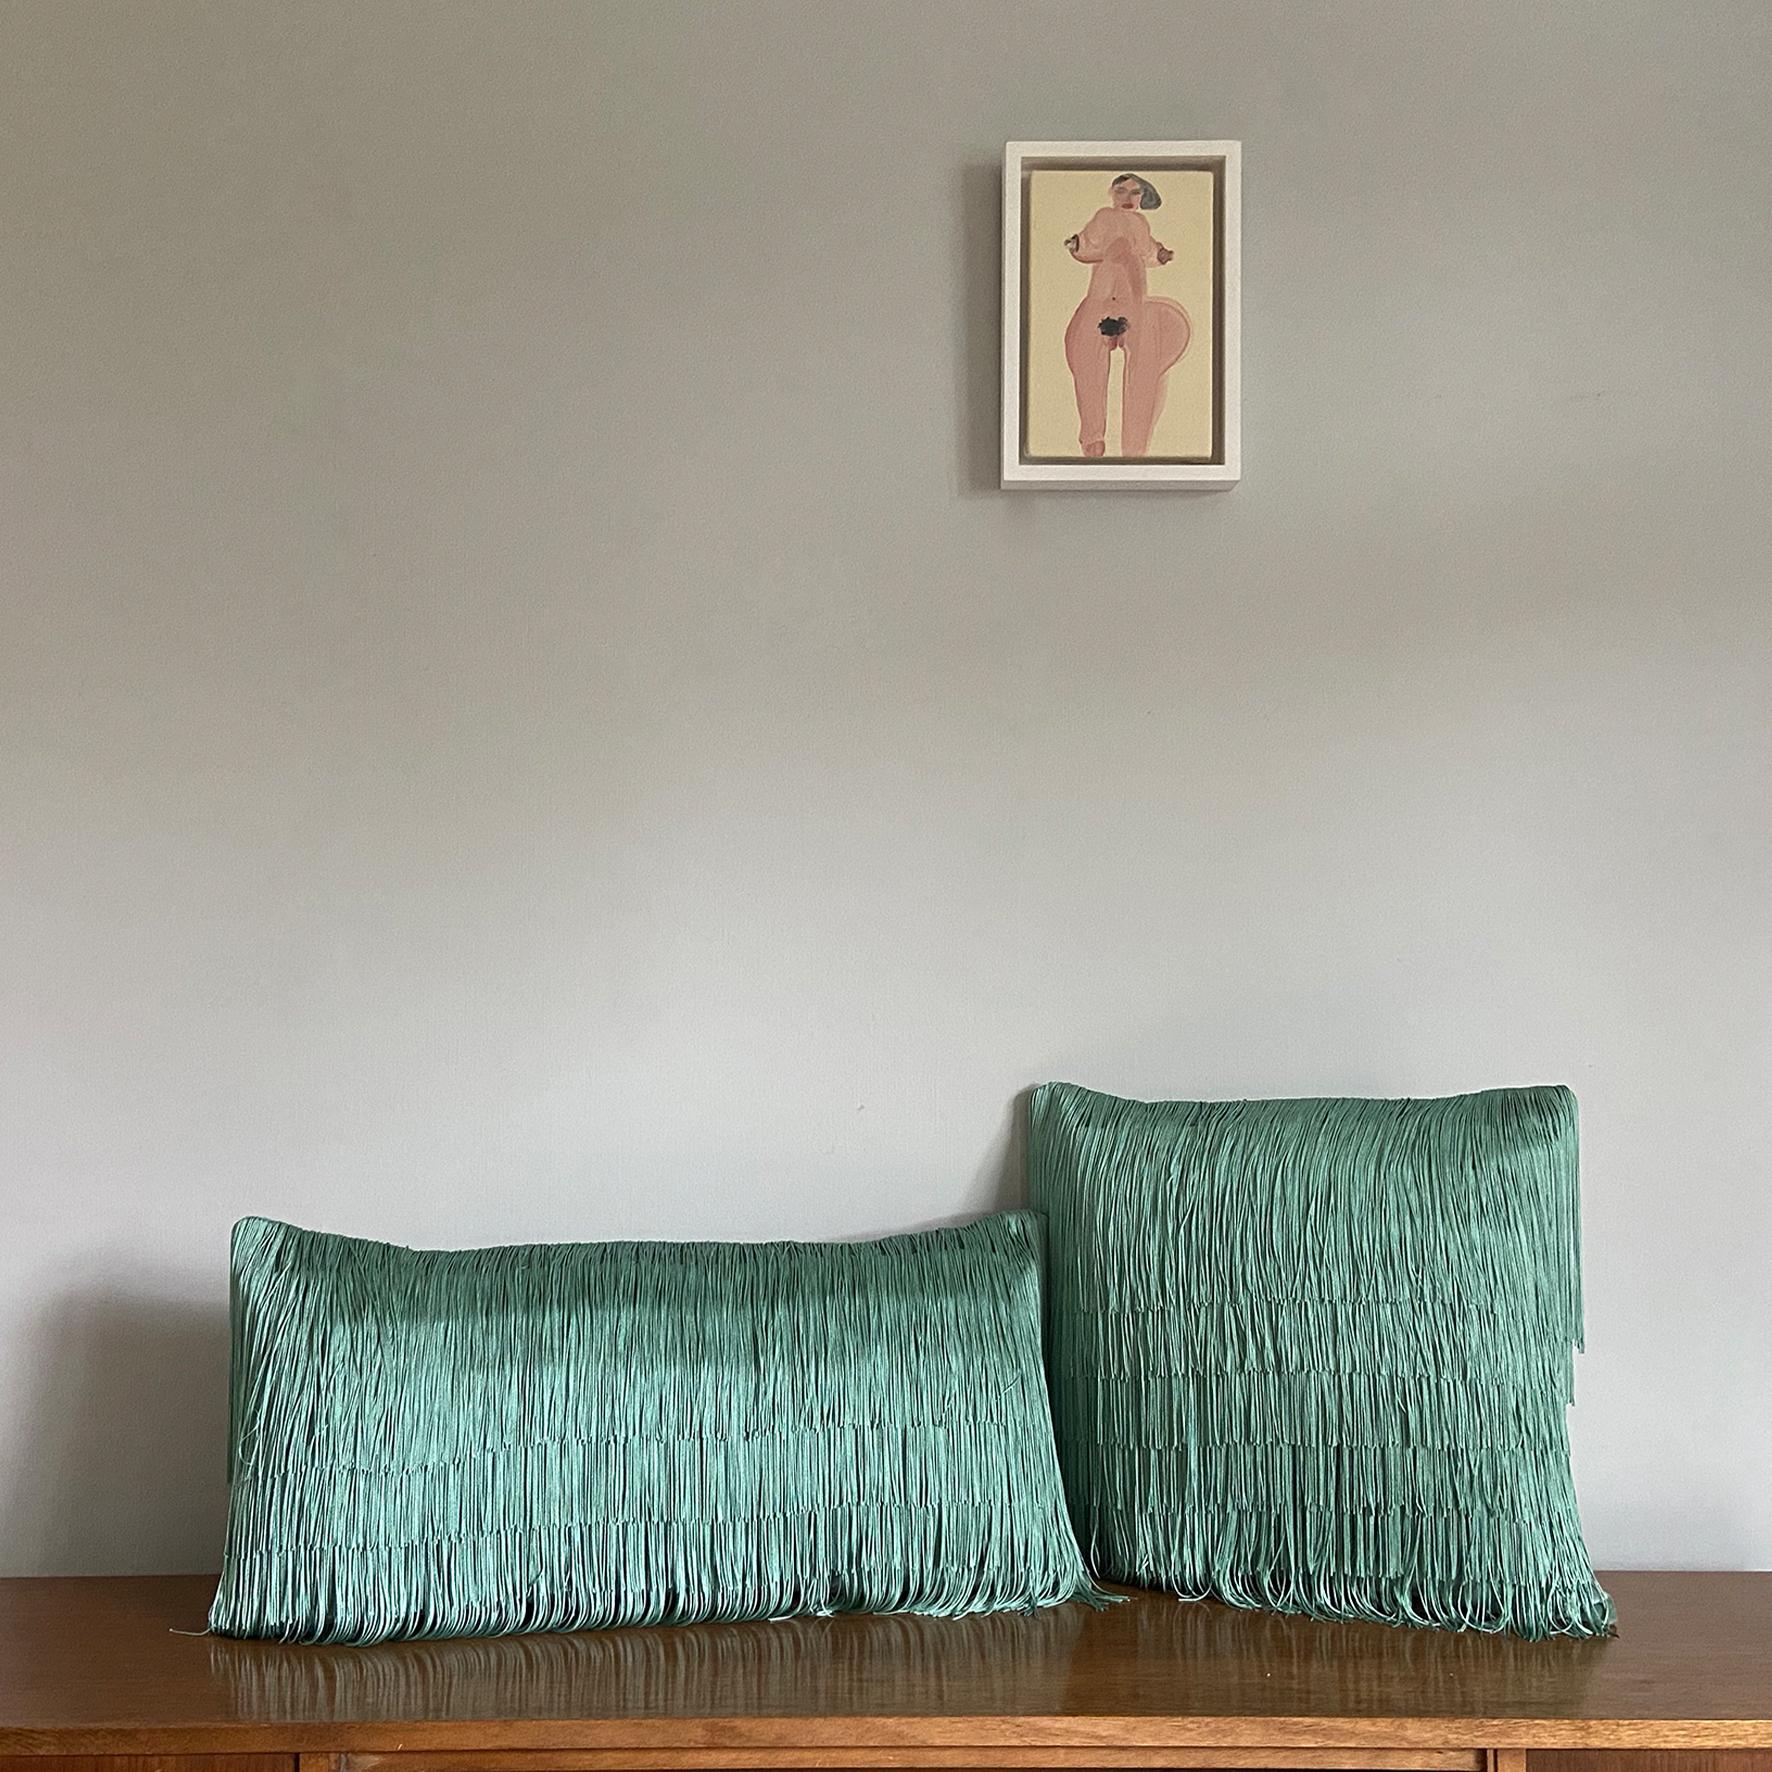 In a jewel-like jade colourway, our signature velvet tassel cushion will make the ultimate decorative statement in your home. Whether you’re a maximalist adding to your many layers of décor or a minimalist wanting to make an impact this cushion does